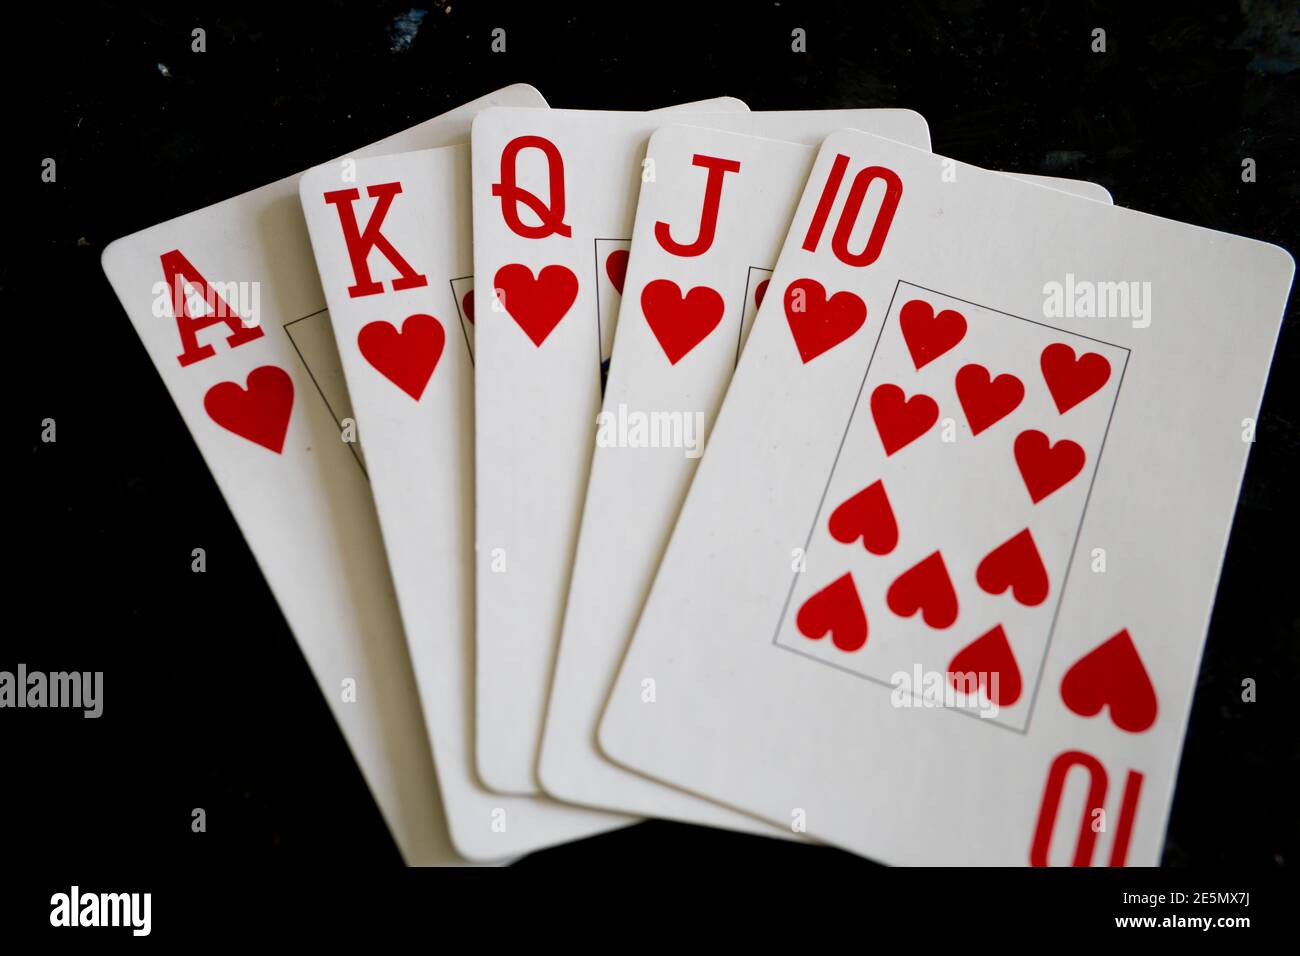 Create an artistic representation of a royal flush, the highest-ranking  hand in poker, using vibrant colors and intricate details. showcase the  five cards (ace, king, queen, jack, and ten) from a single